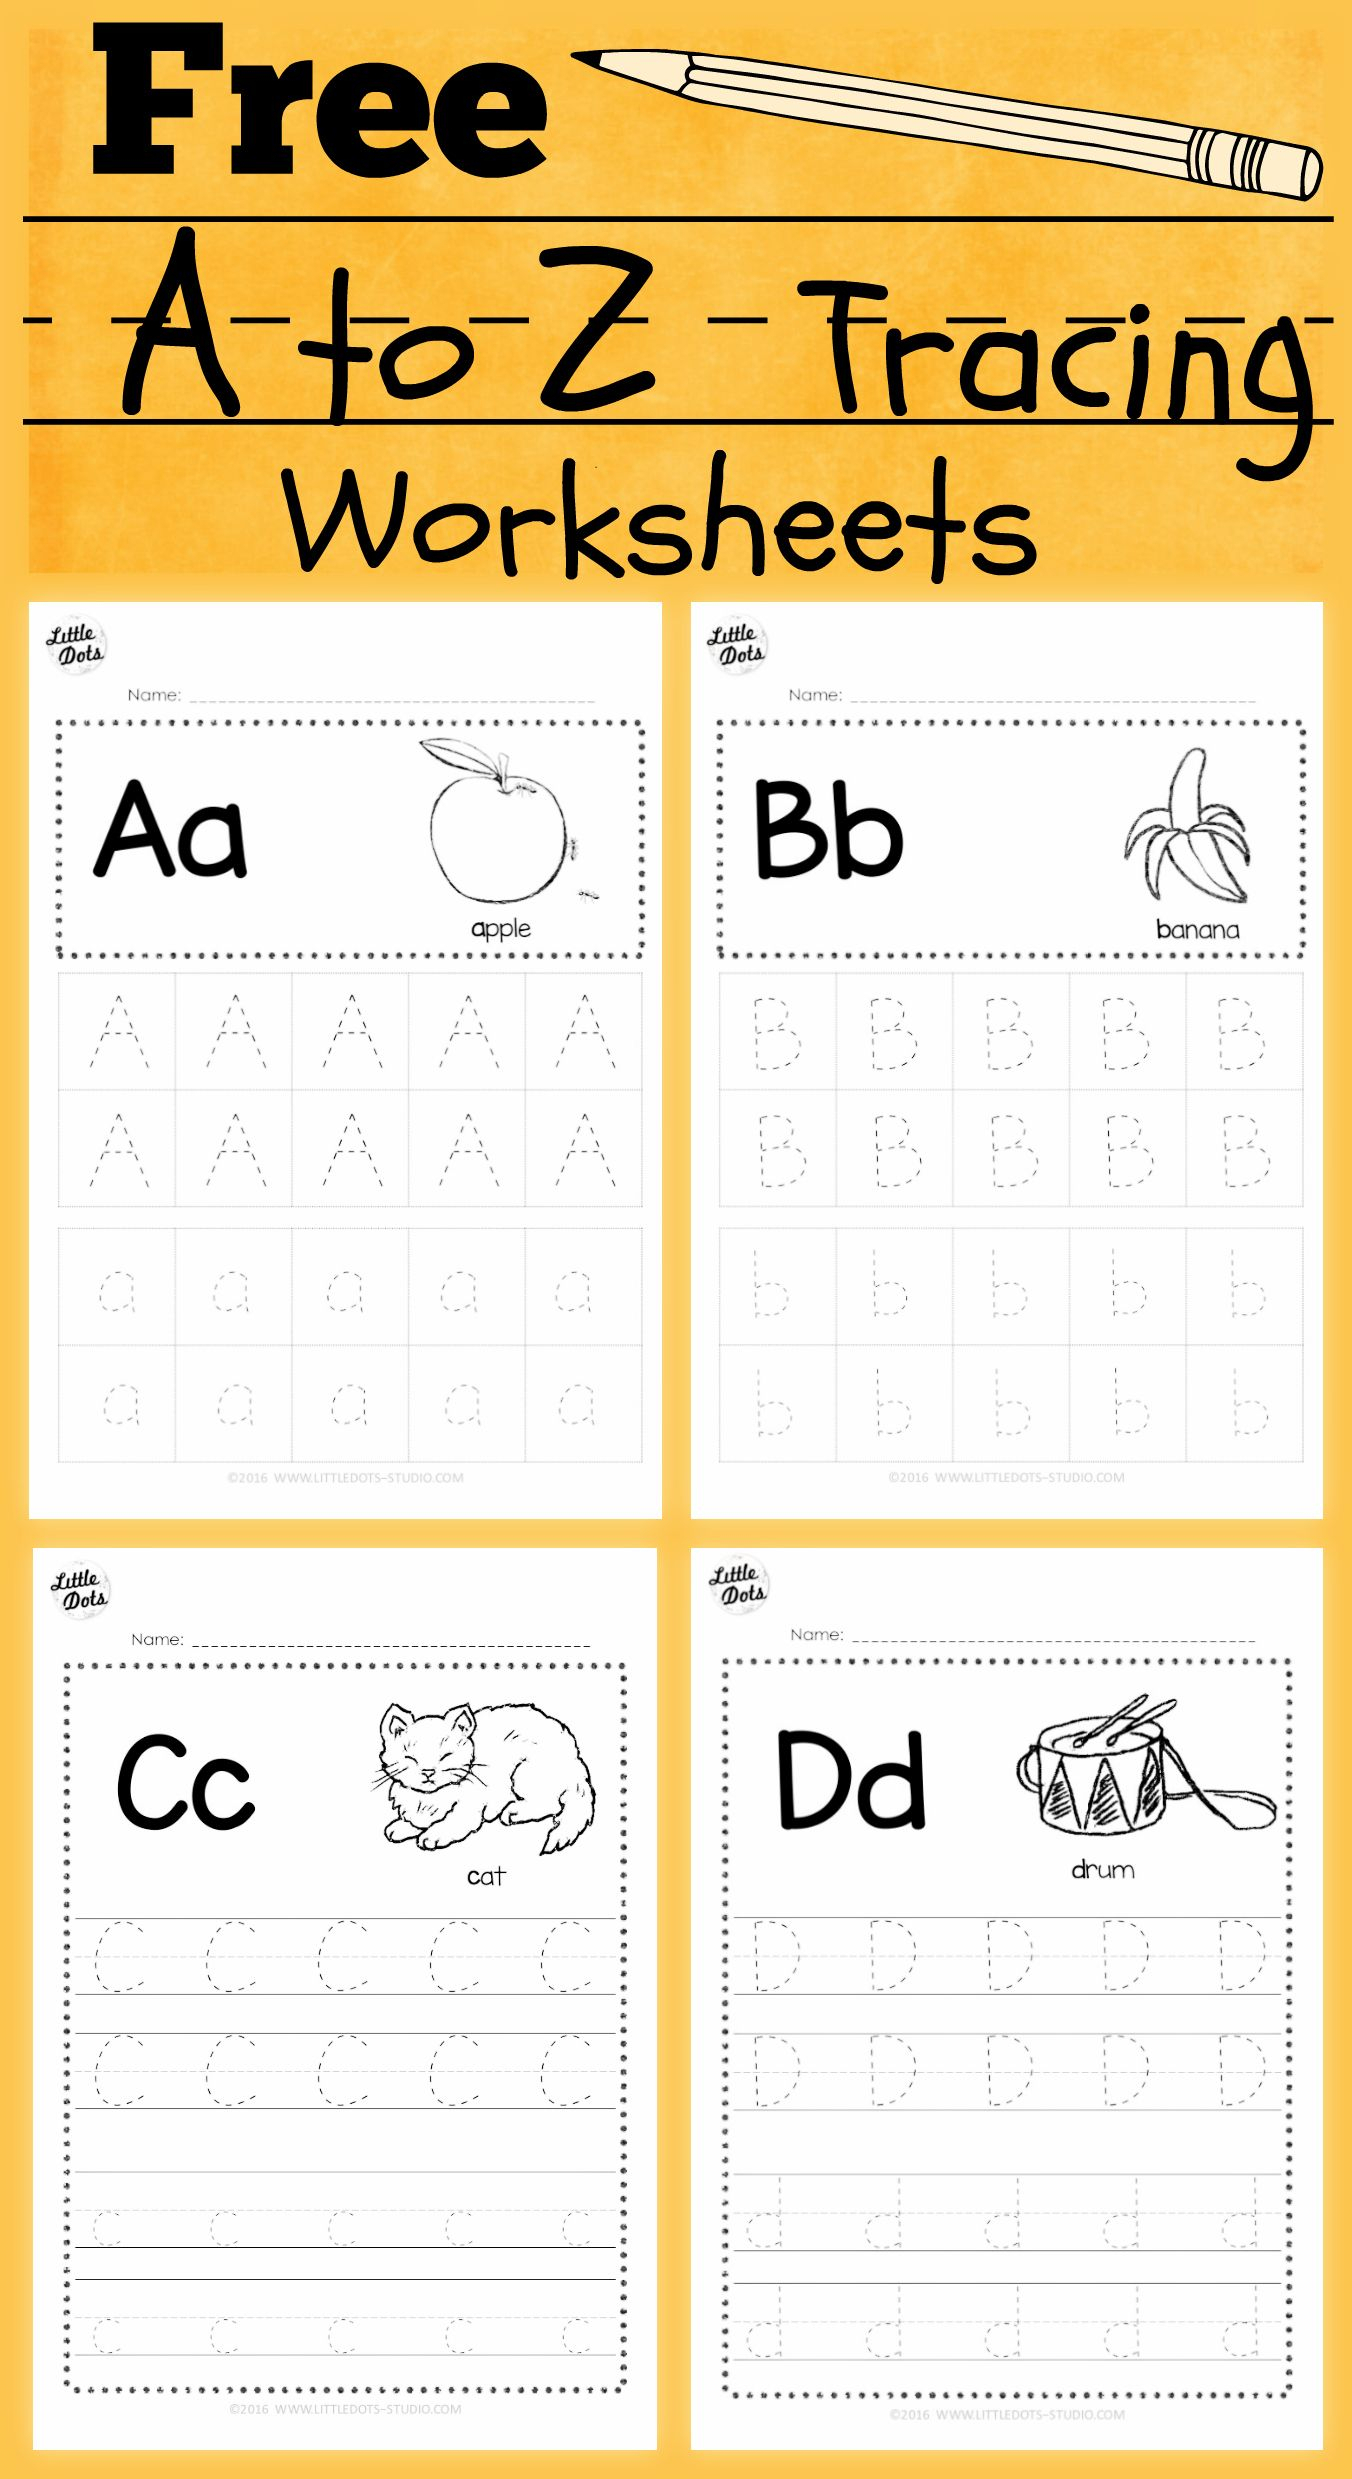 Download Free Alphabet Tracing Worksheets For Letter A To Z within Free Tracing Letters A-Z Worksheets